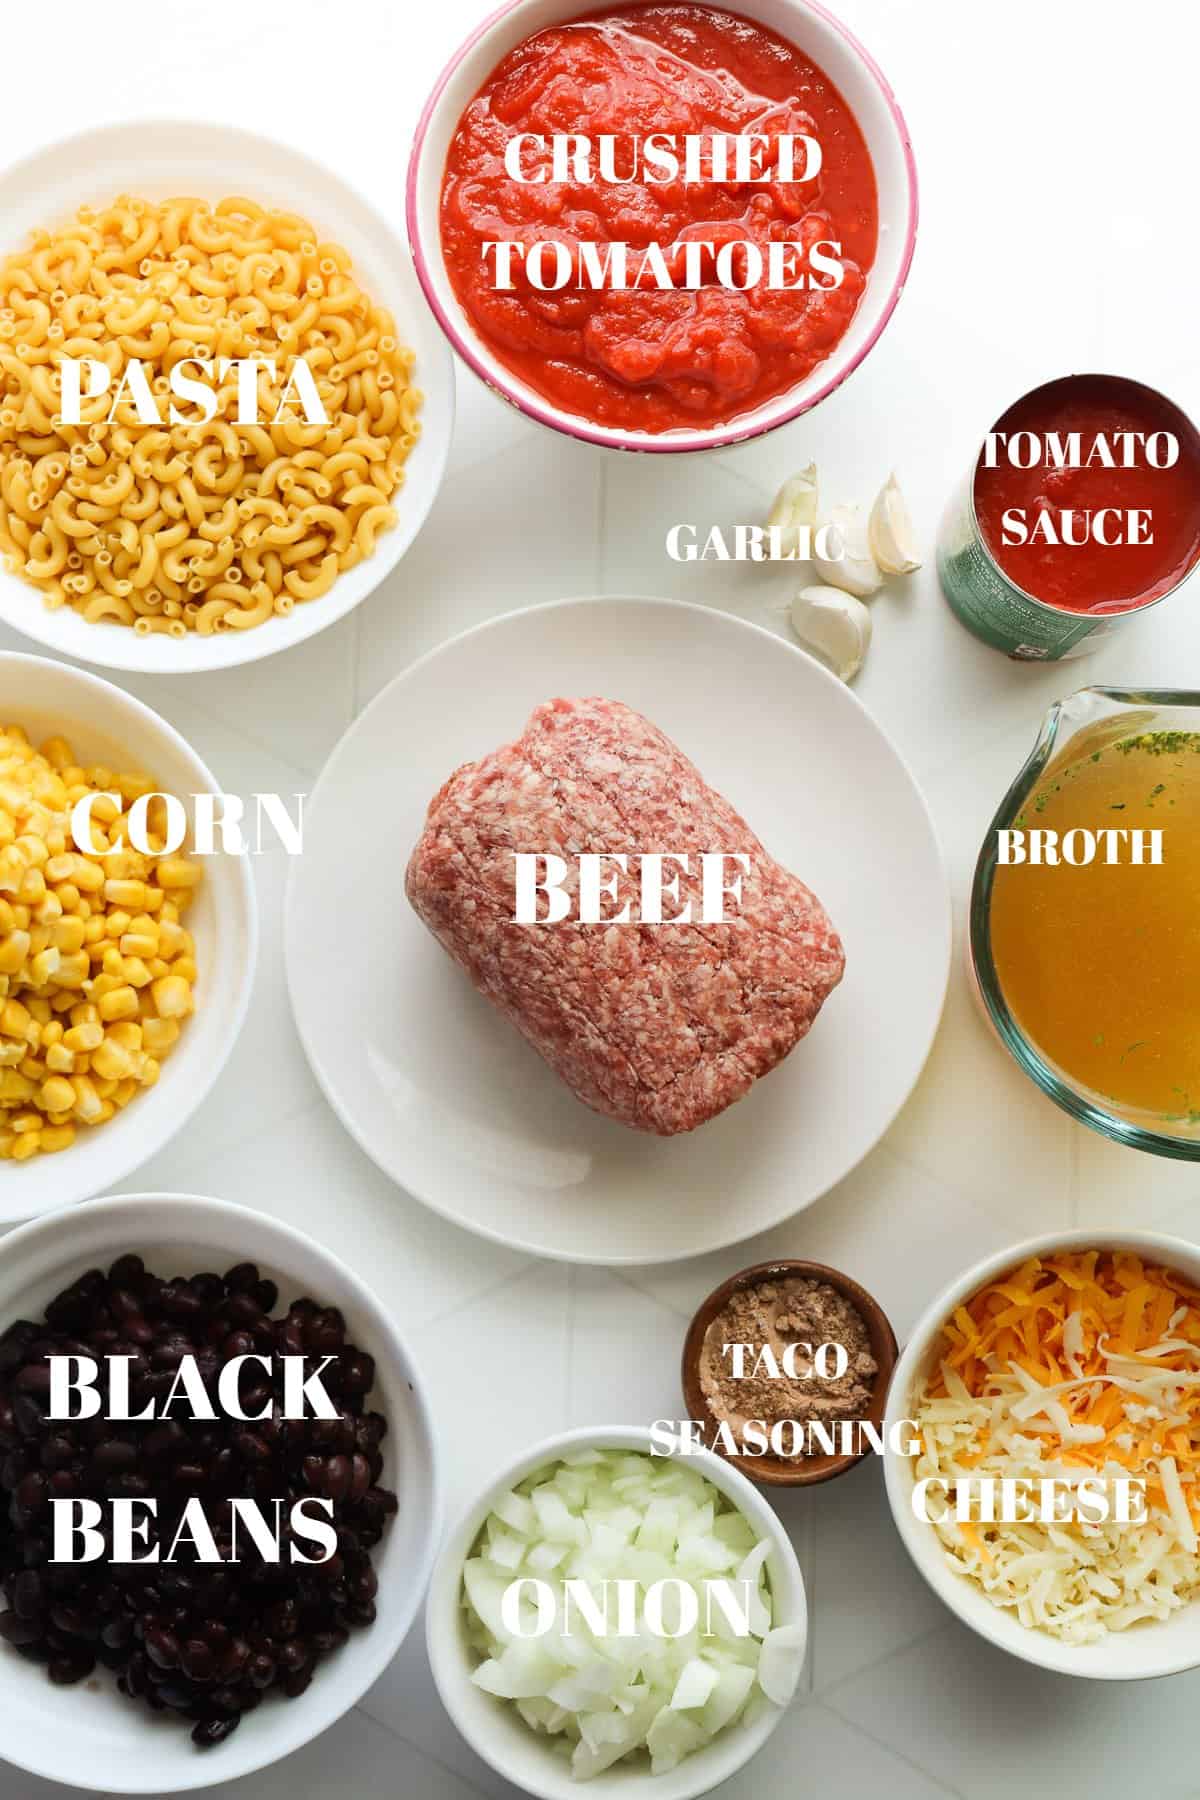 All ingredients for taco pasta in bowls on a white tile board.